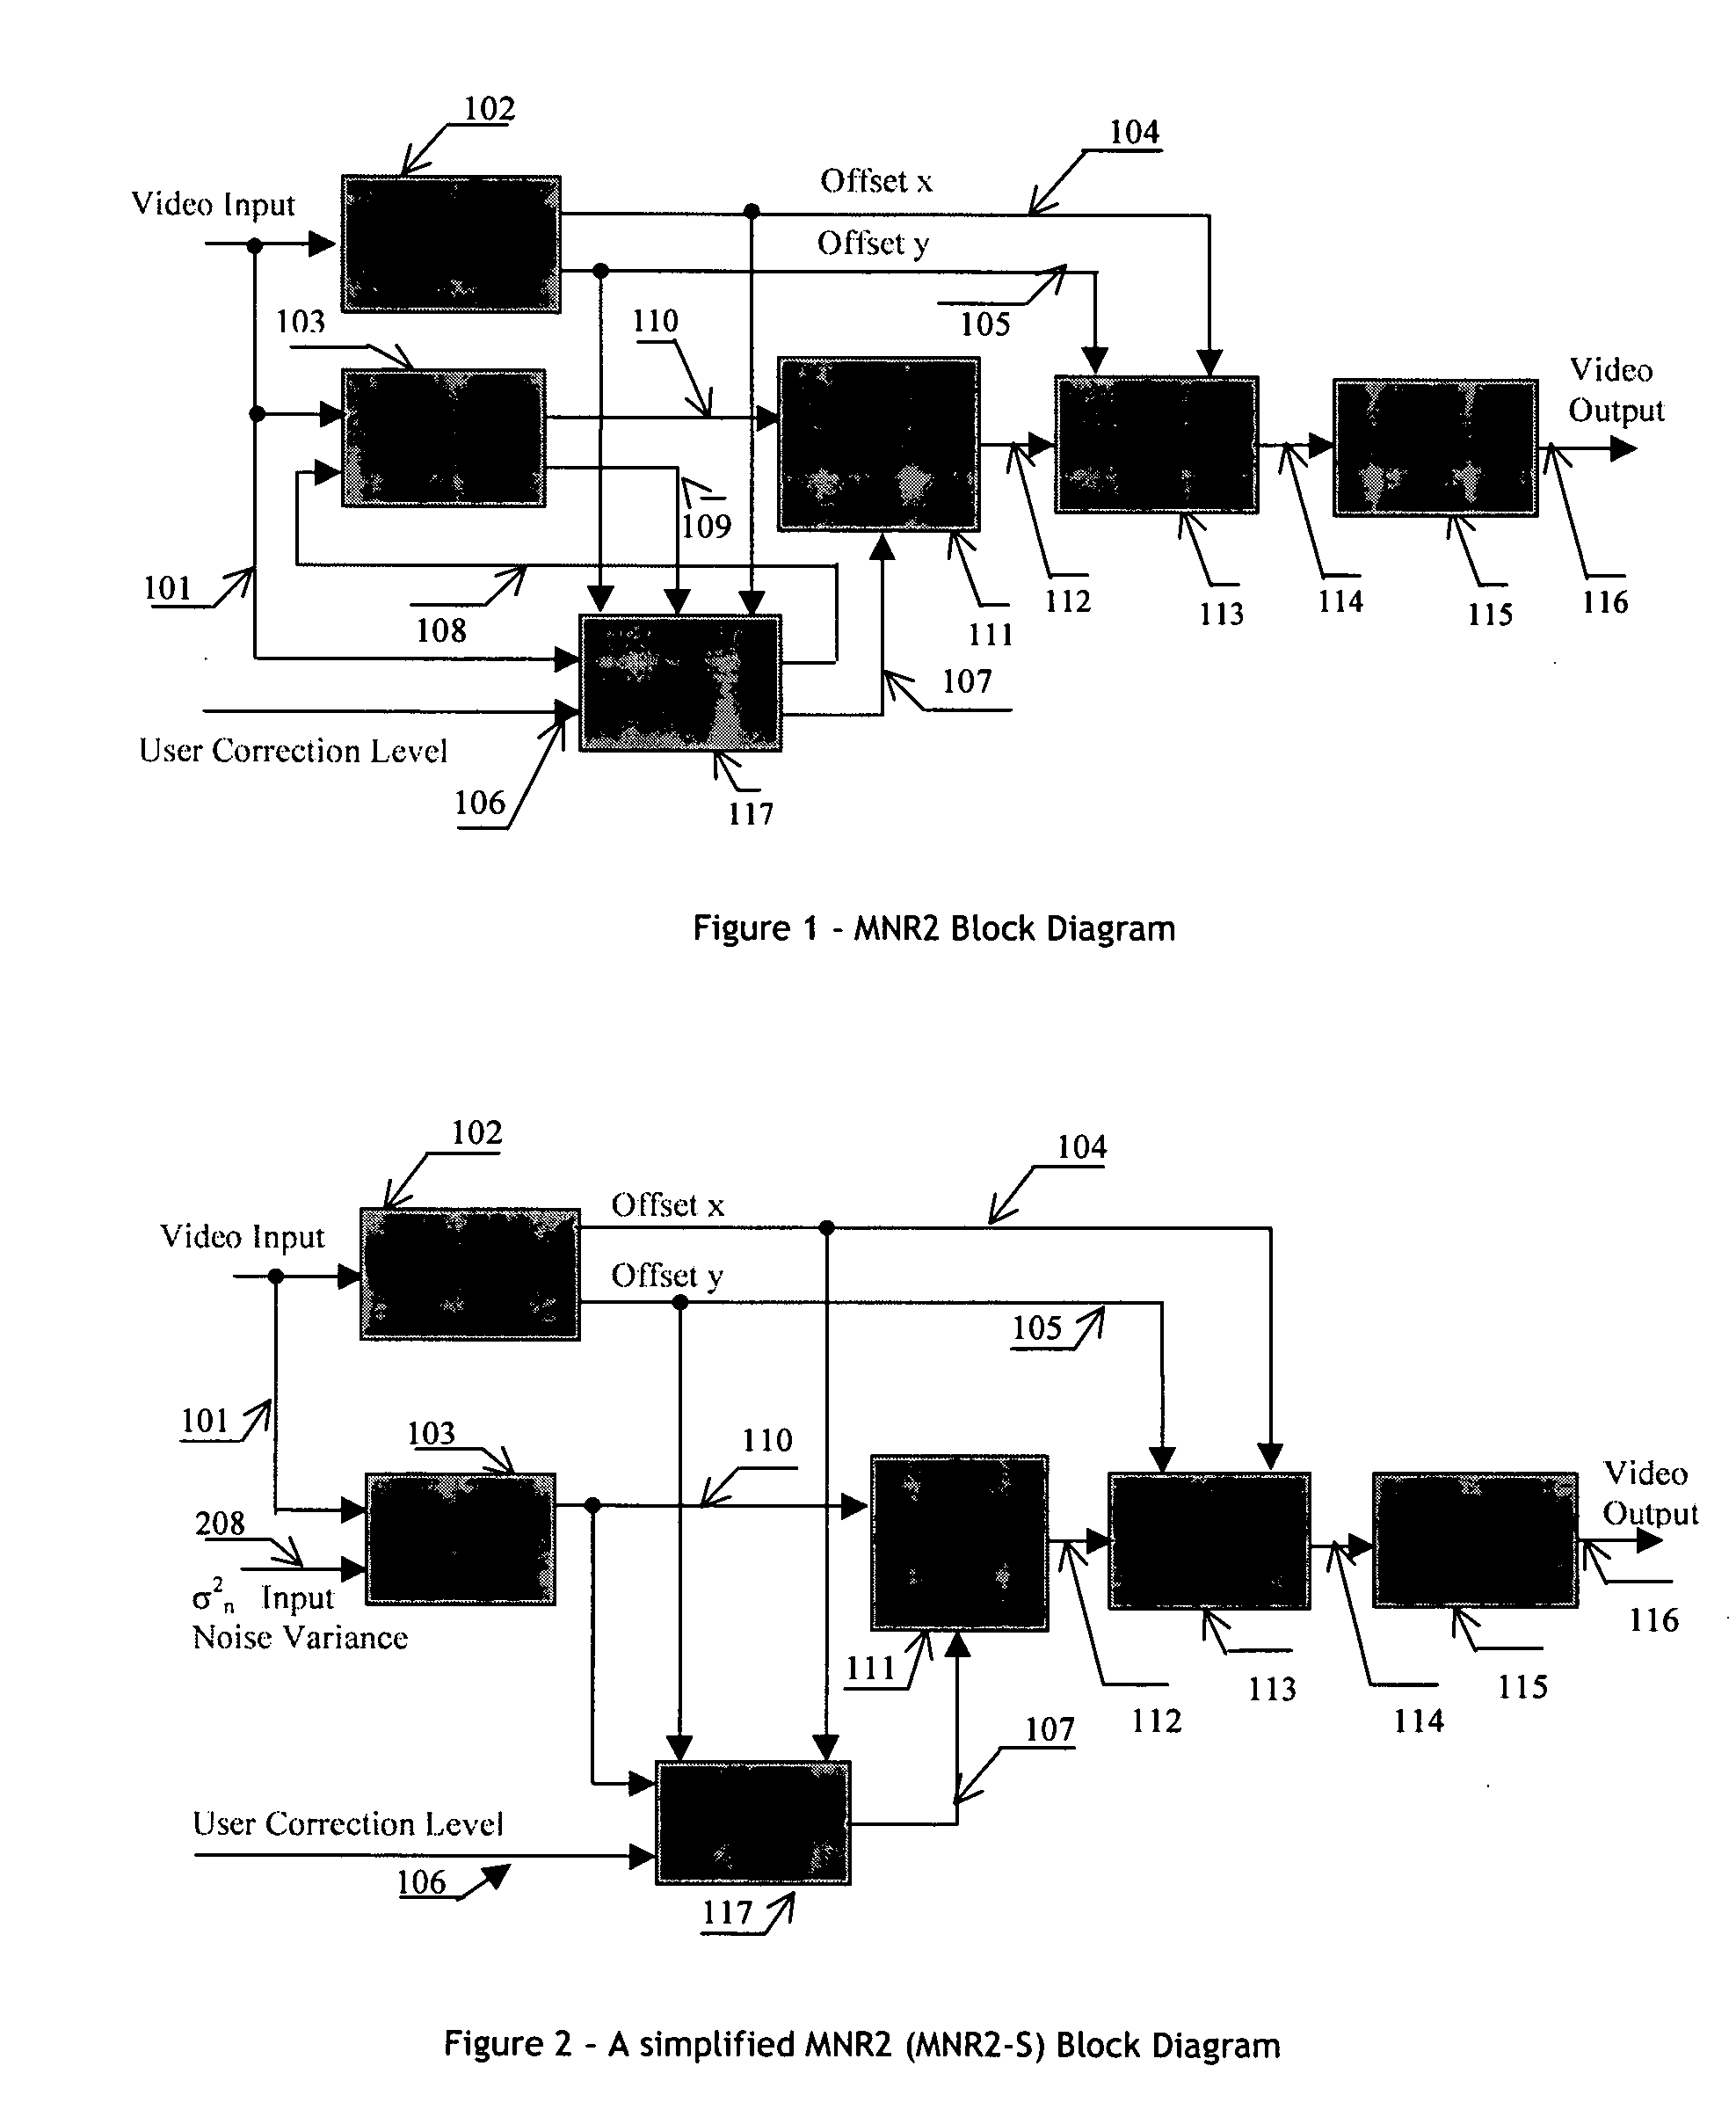 Apparatus and method for adaptive 3D artifact reducing for encoded image signal